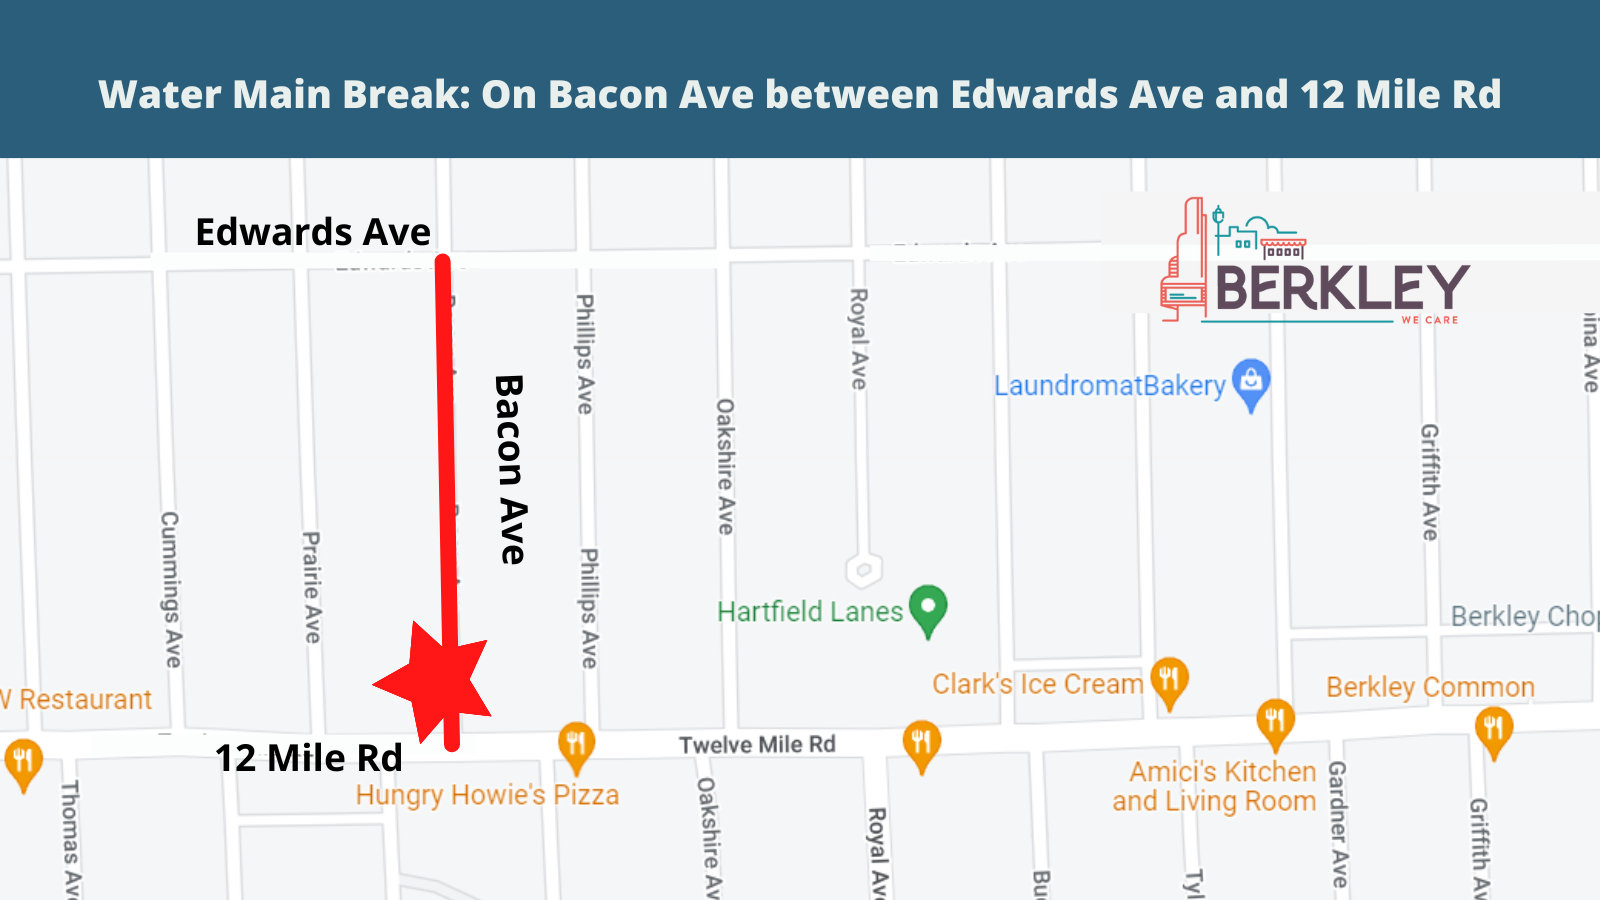 Water Main Break Maps on Bacon btwn Edwards and 12 Mile